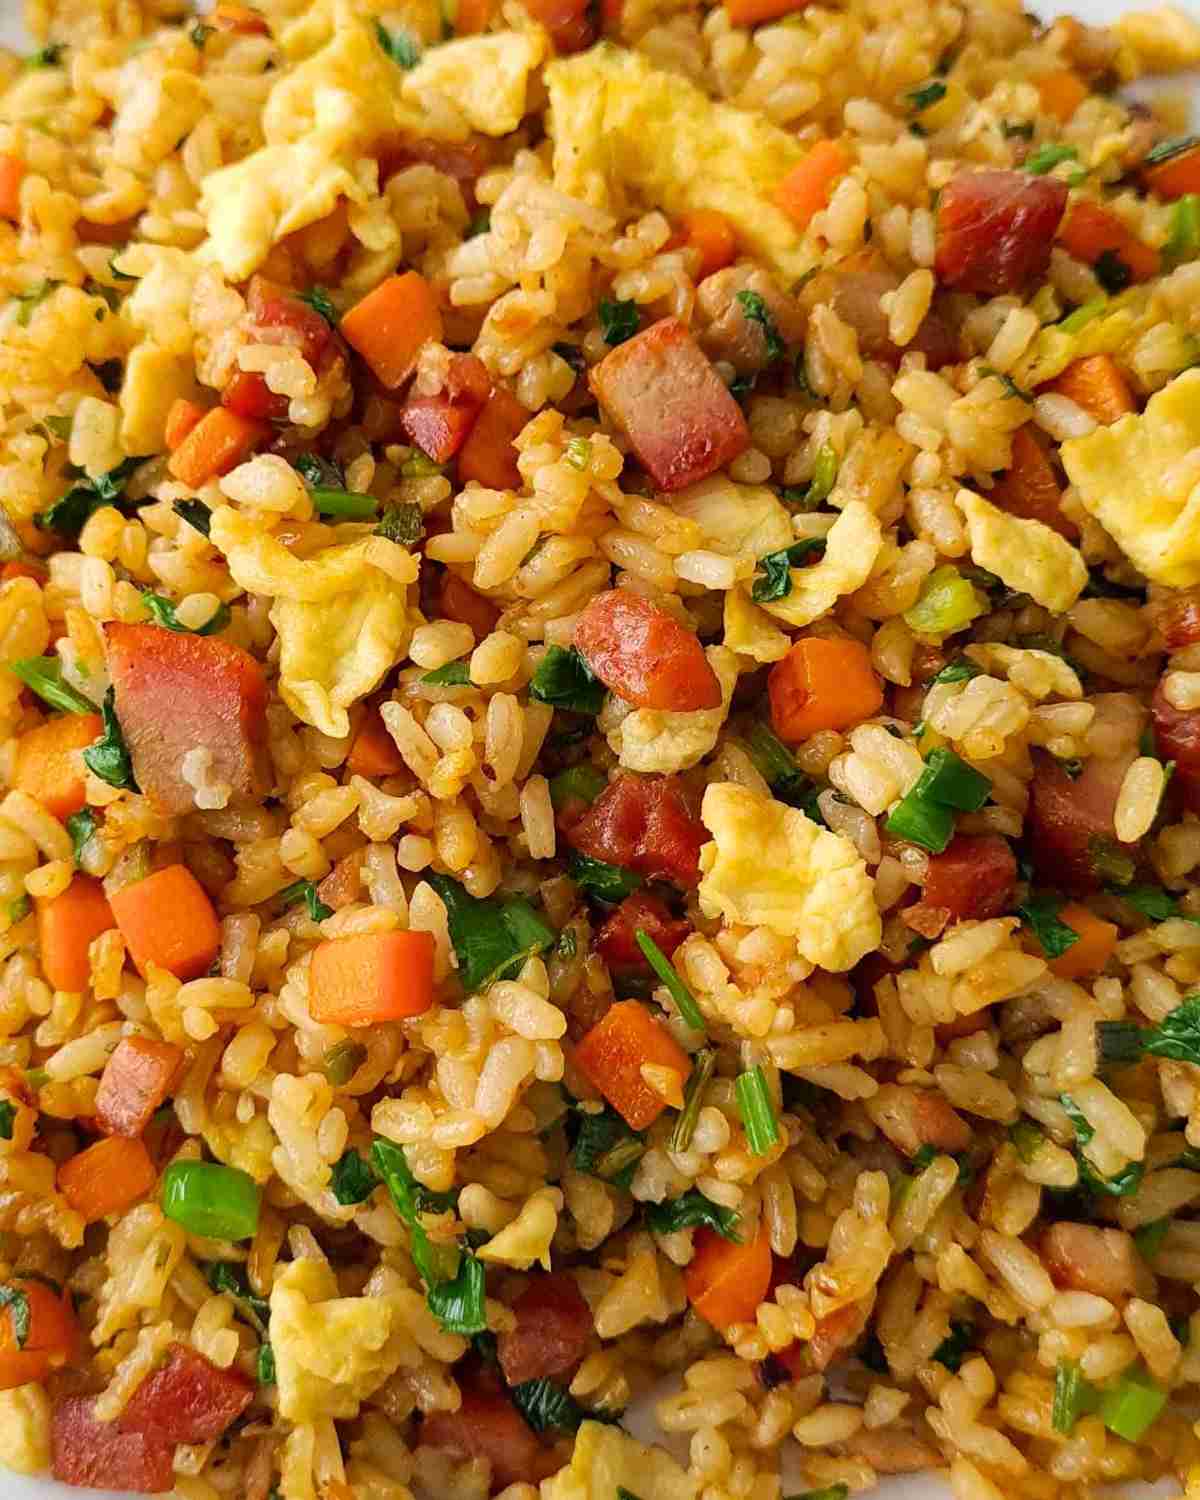 Close up of fried rice showing small pieces of fried rice, BBQ pork, eggs, carrots and herbs